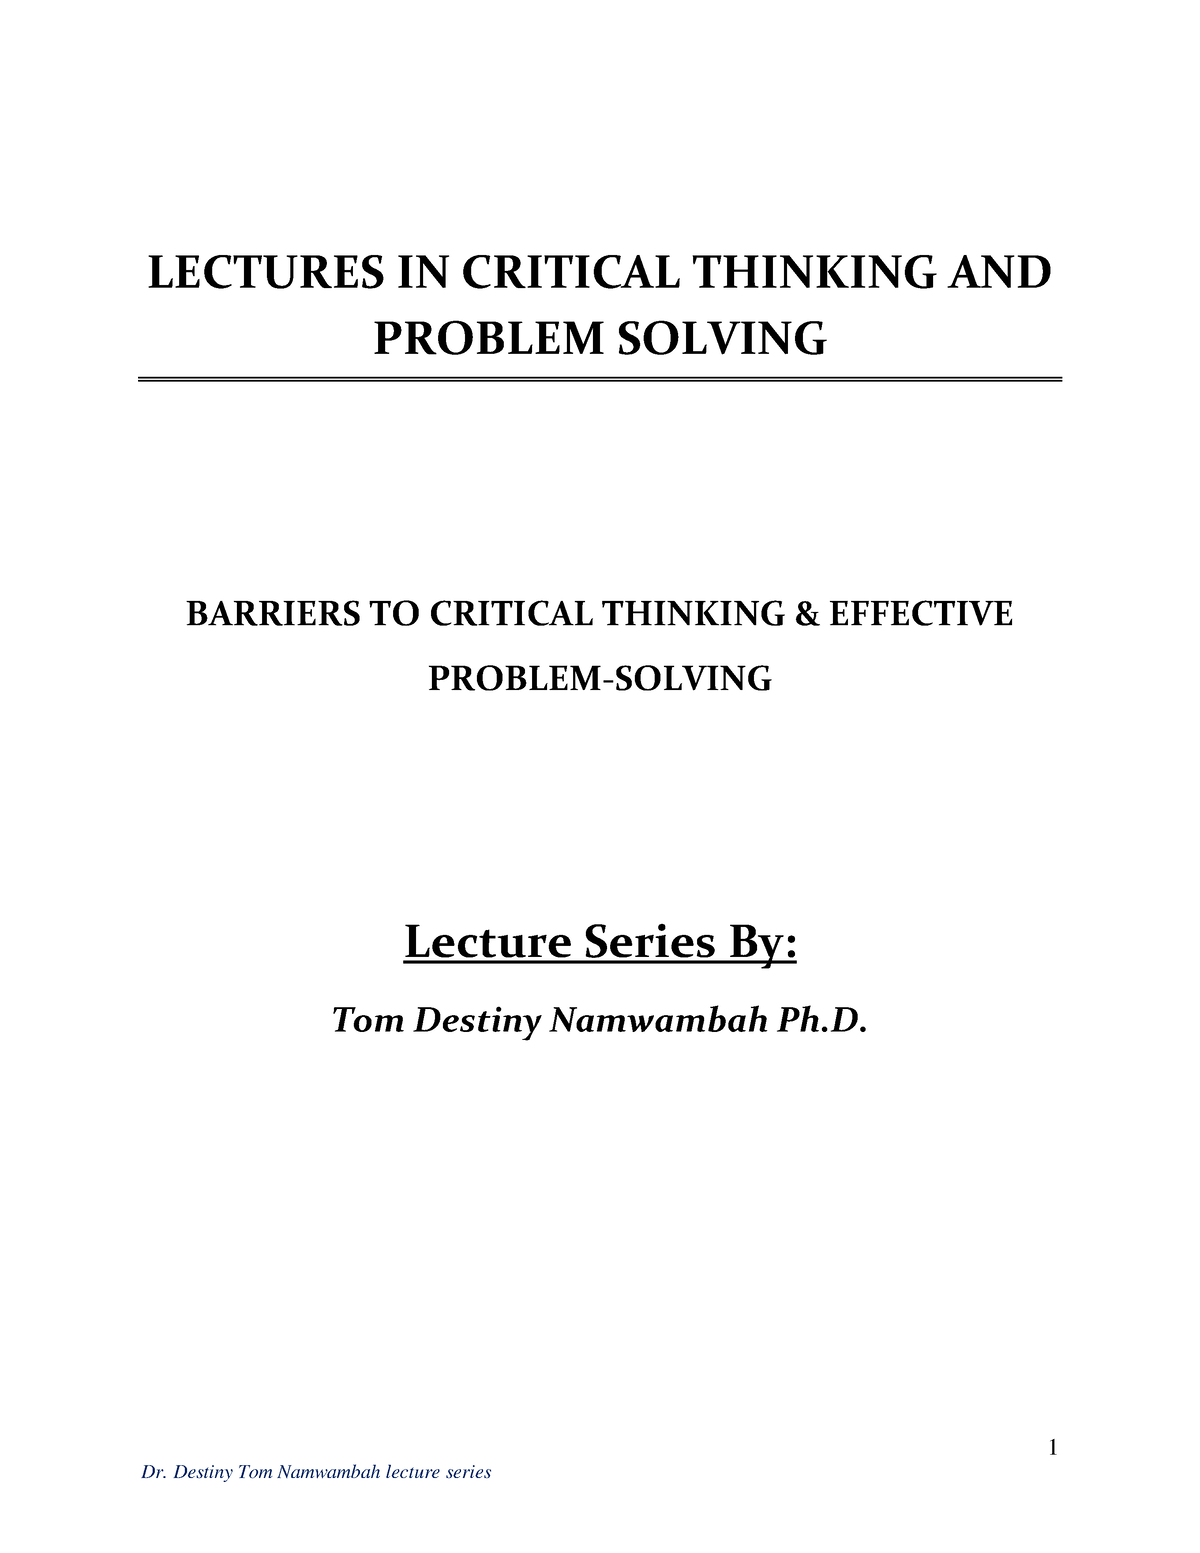 barriers of critical thinking and problem solving pdf